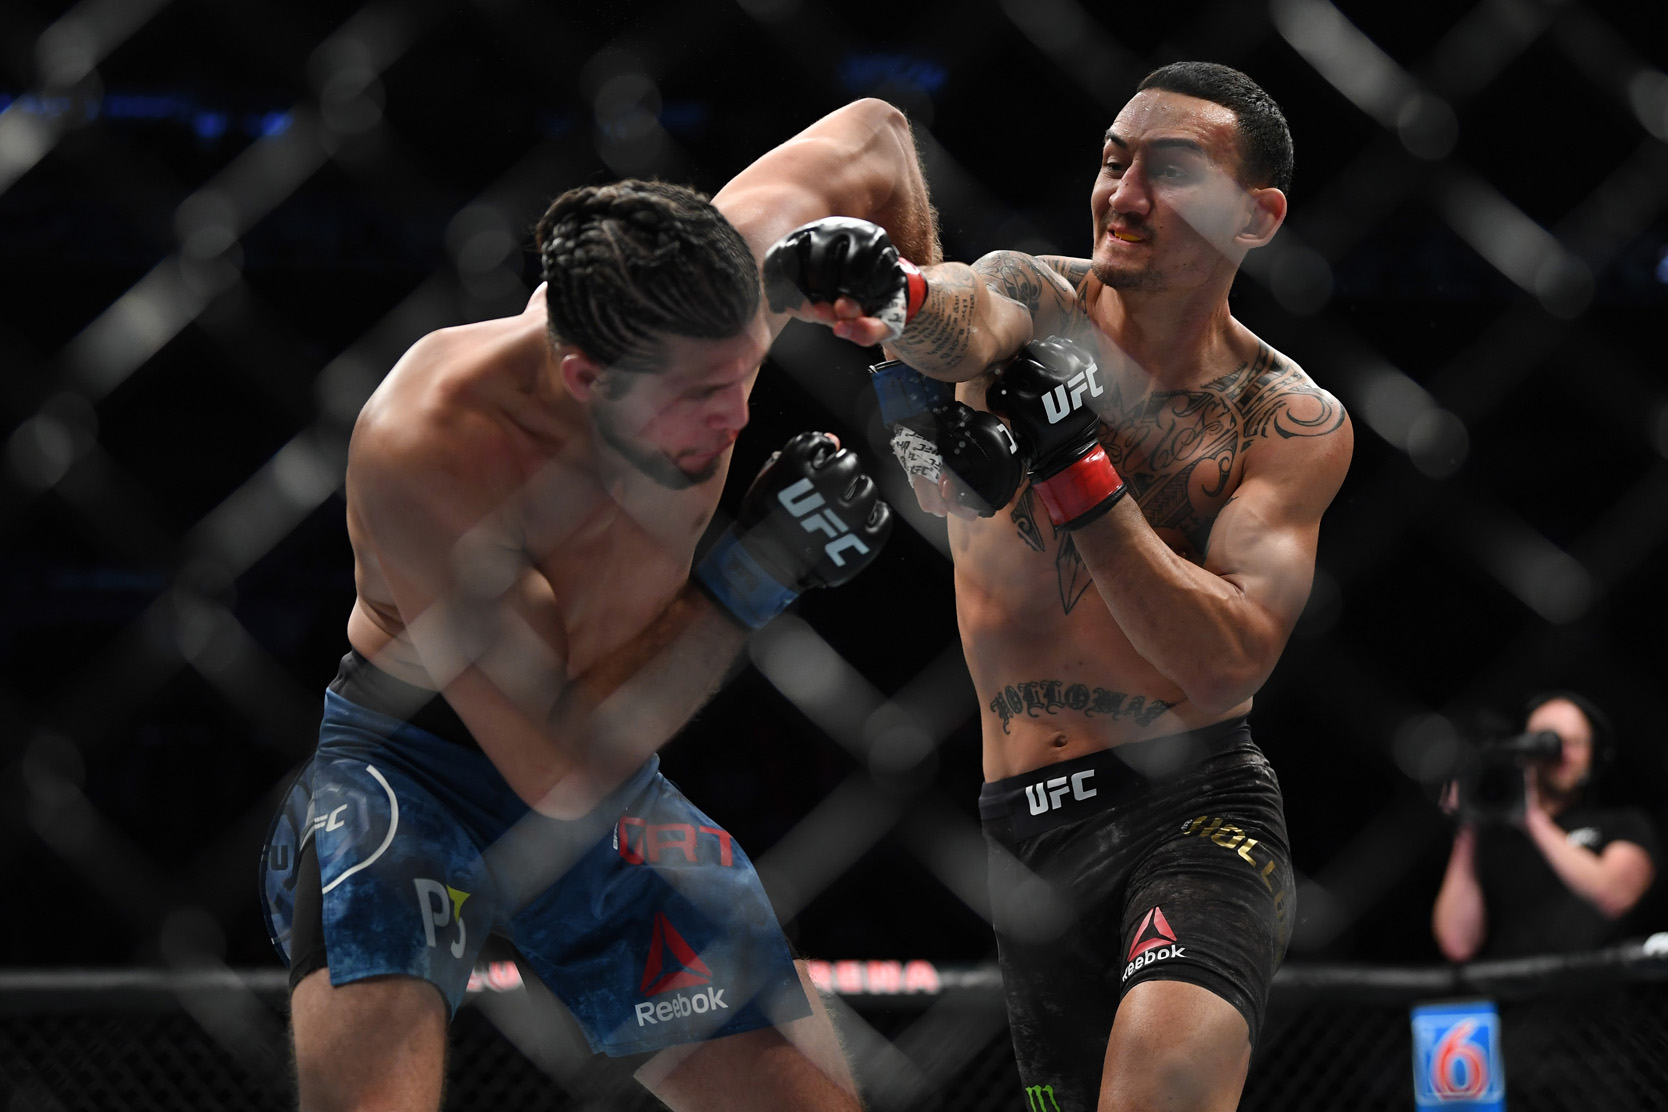 Monster Energy’s Max Holloway Defeats Brian Ortega in Thrilling Four-Round Match At UFC 231